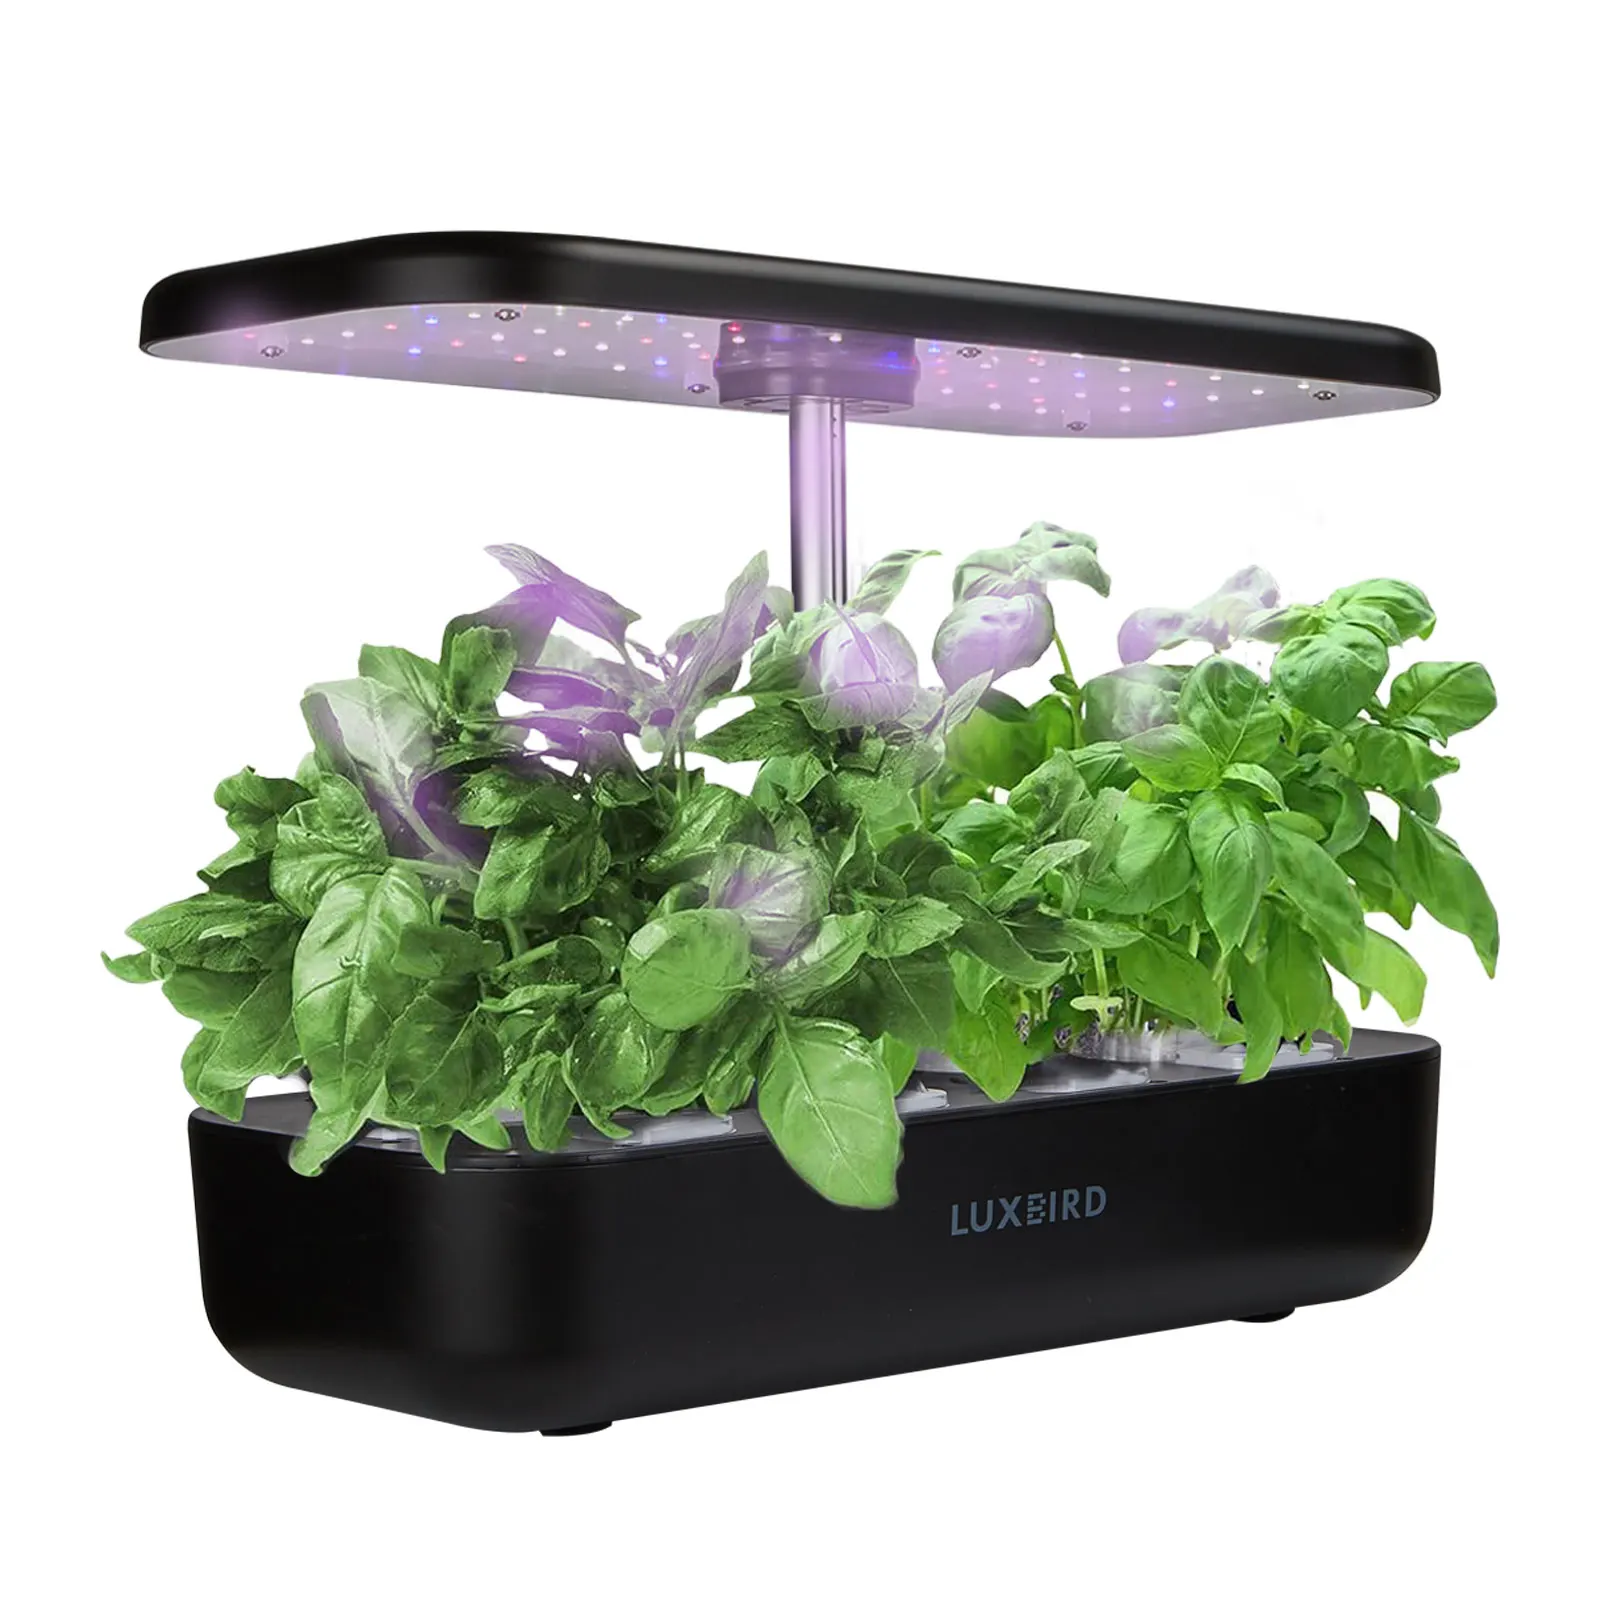 Automatic Seeds Nursery Pots Hydroponics Growing System With LED Growing Lights Adjustable Panel Height Full Spectrum Sunlight